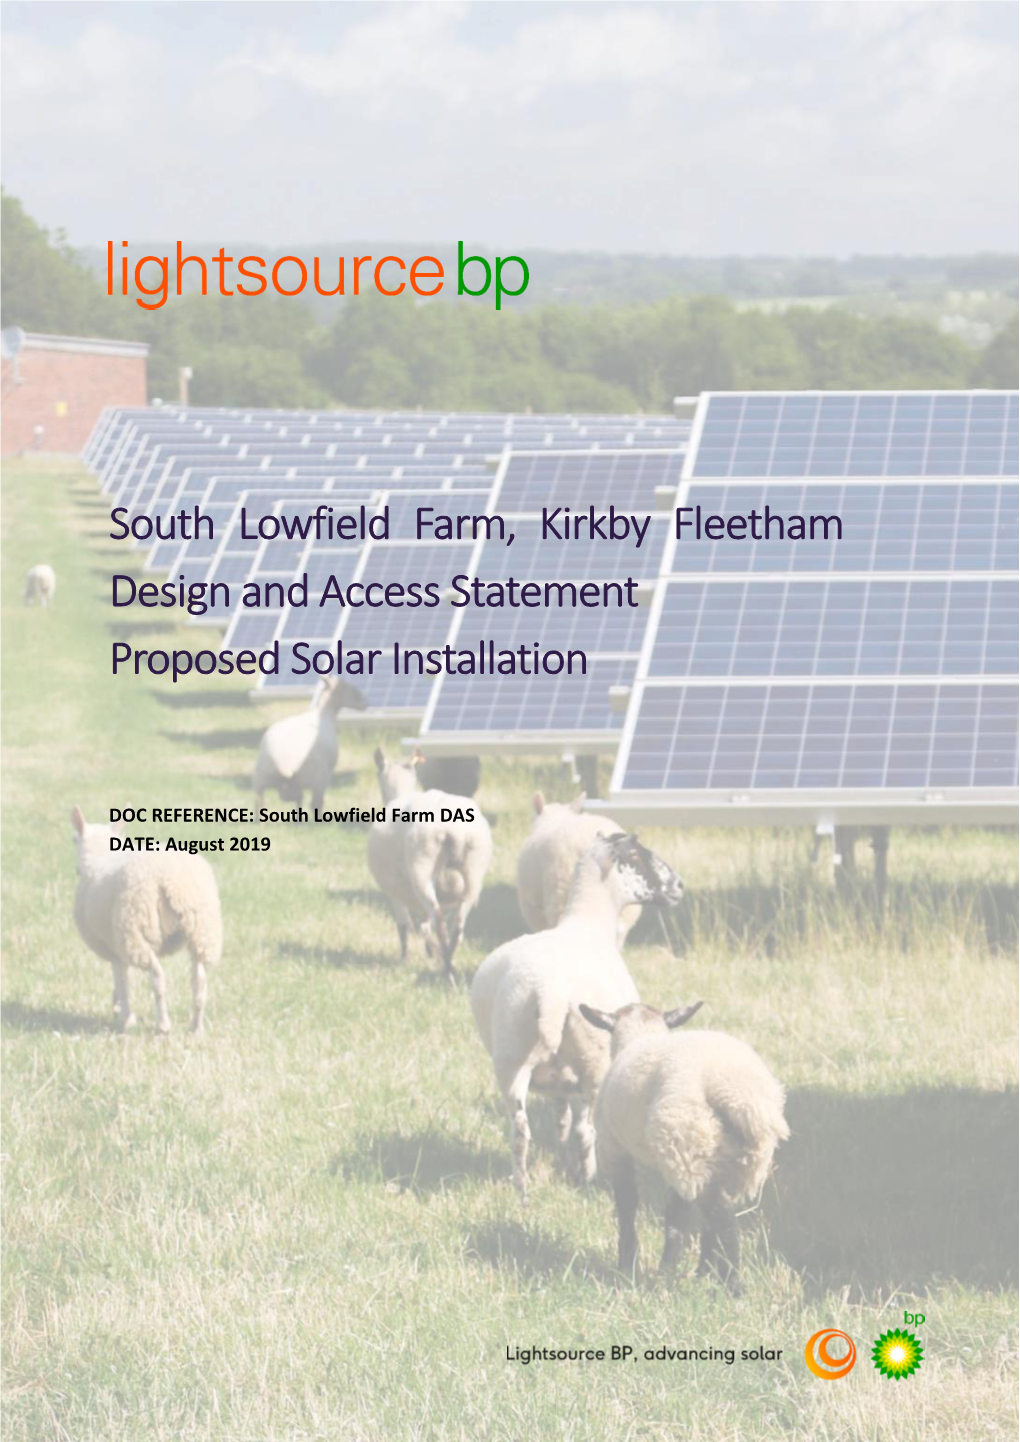 South Lowfield Farm, Kirkby Fleetham Design and Access Statement Proposed Solar Installation